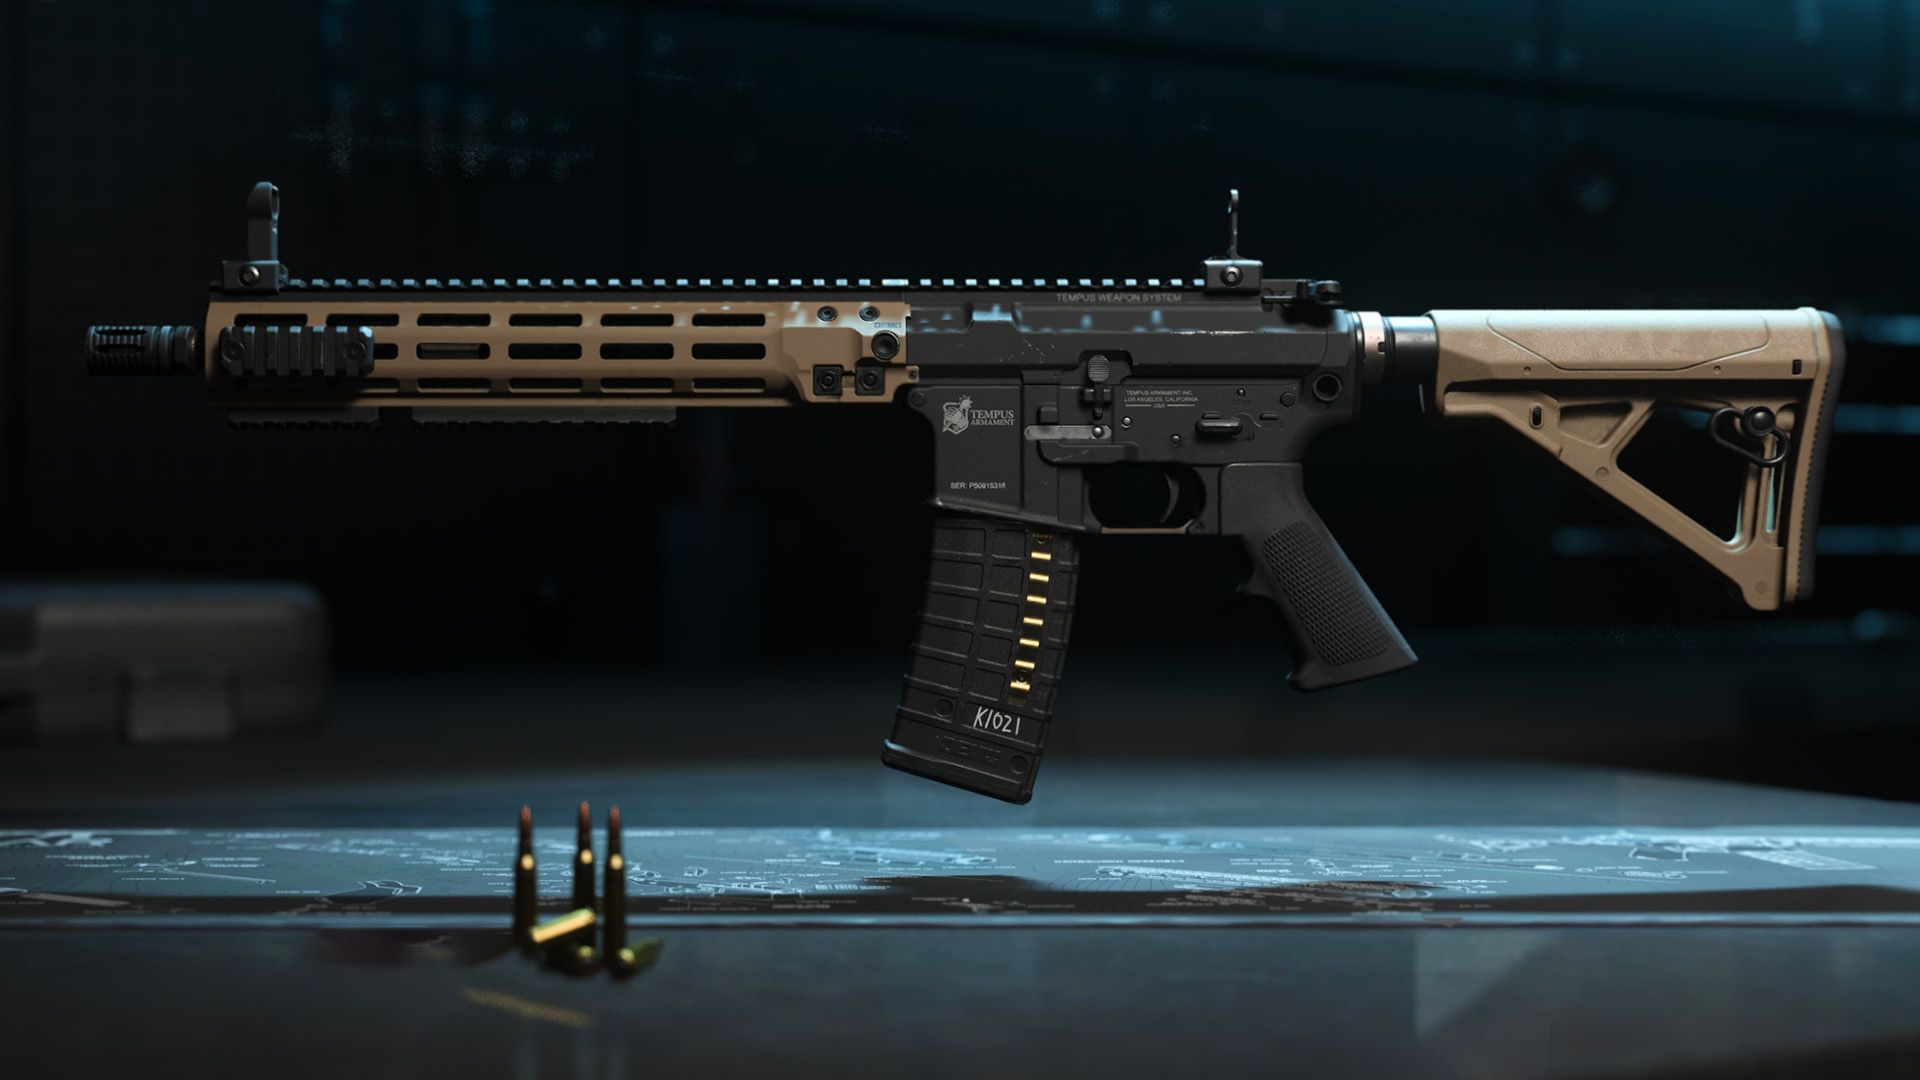 Best M4 loadout in Warzone 2: The M4, one of the most recognisable assault rifles in the Call of Duty series, as it appears in Warzone 2.